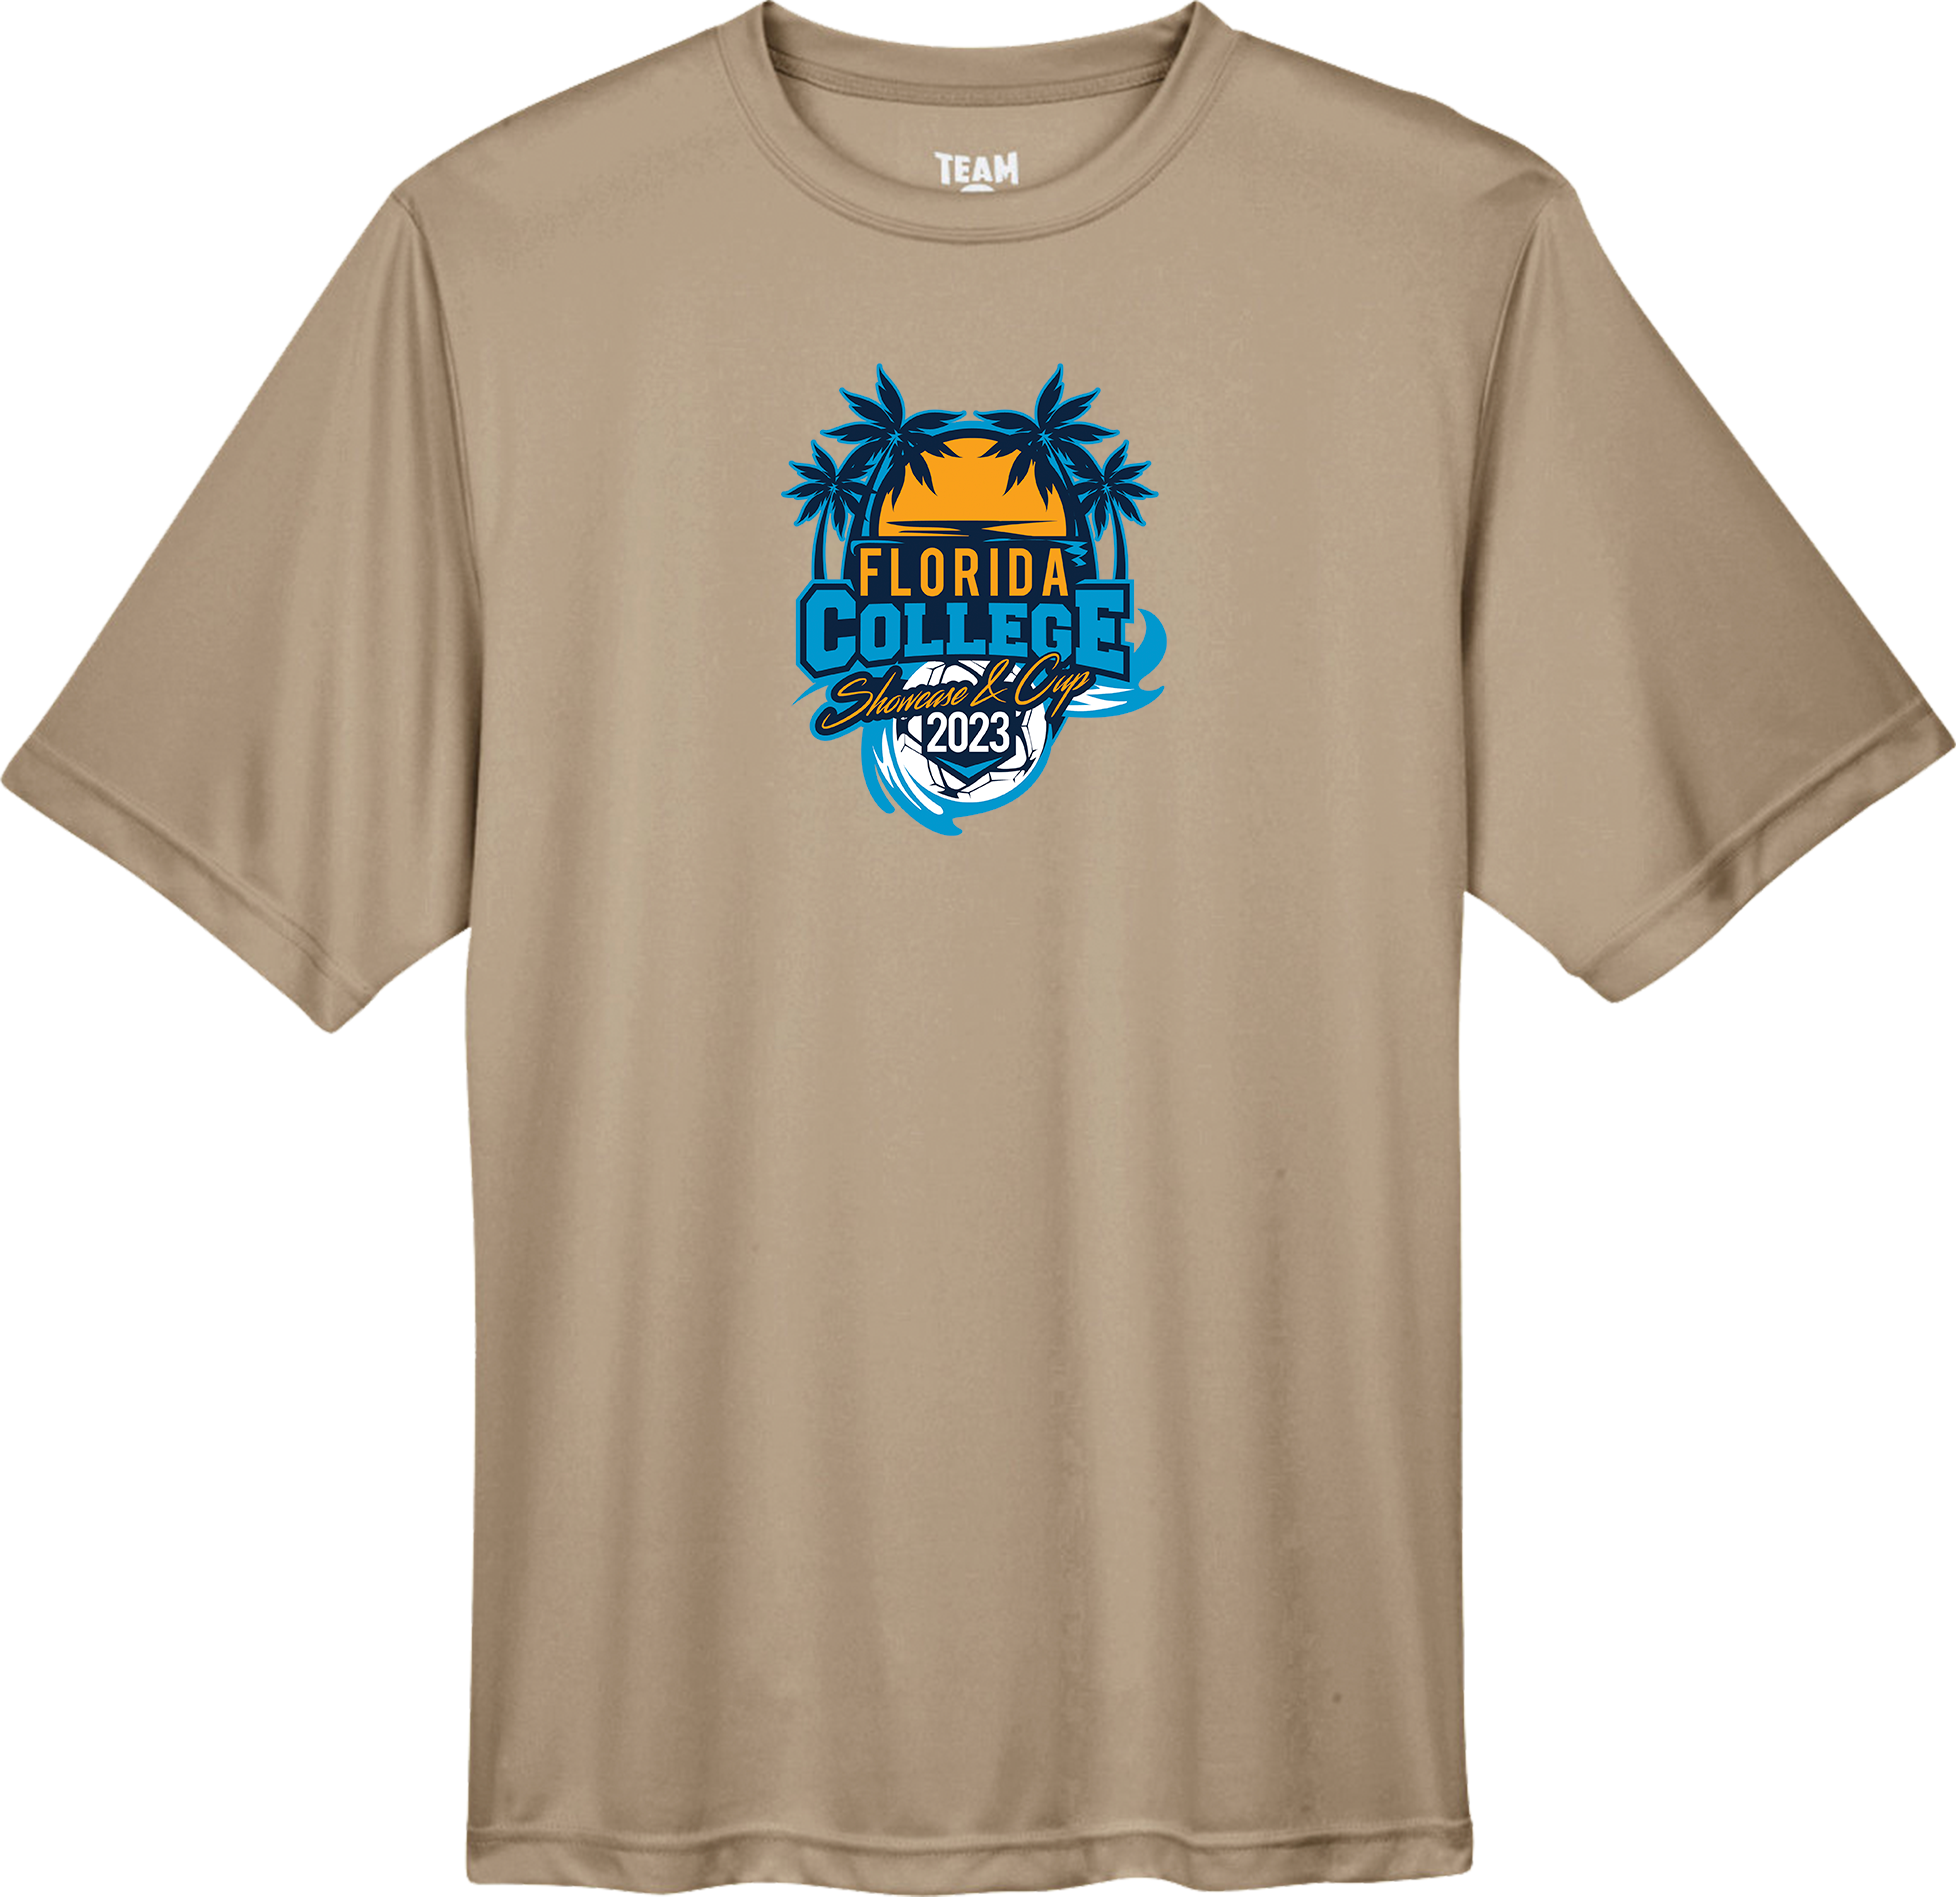 PERFORMANCE SHIRTS - 2023 Florida College Showcase and Cup